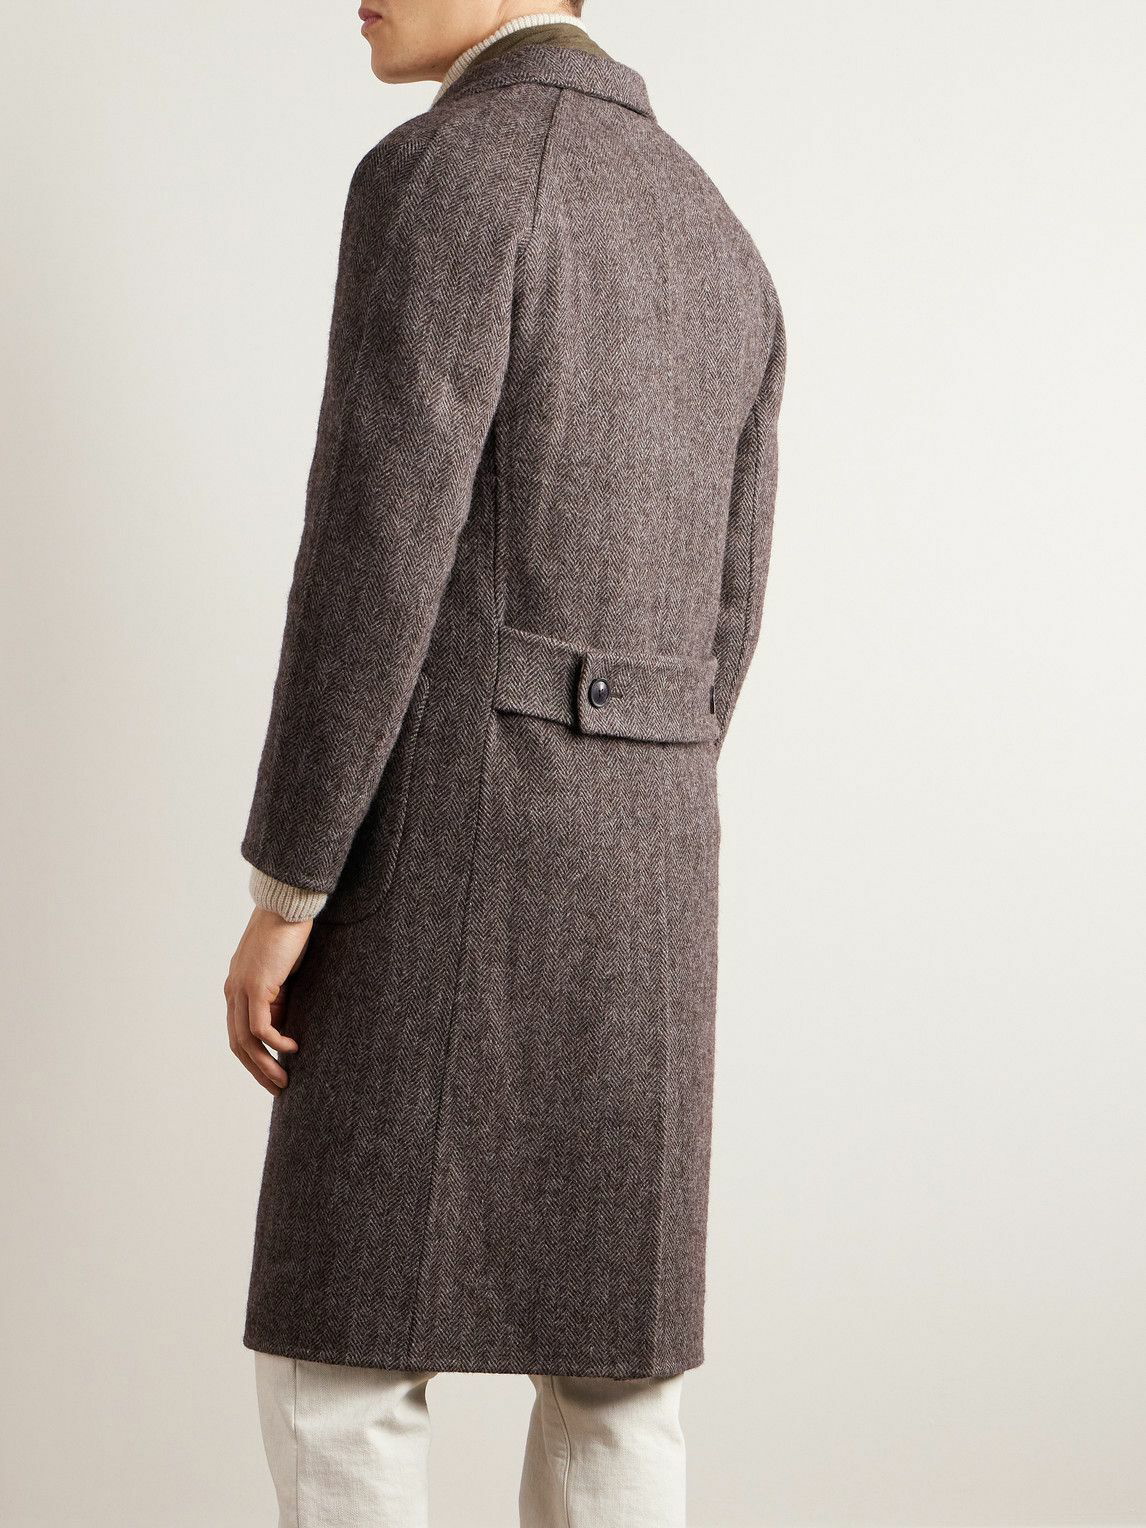 Purdey - Town and Country Double-Breasted Herringbone Wool Coat - Brown ...